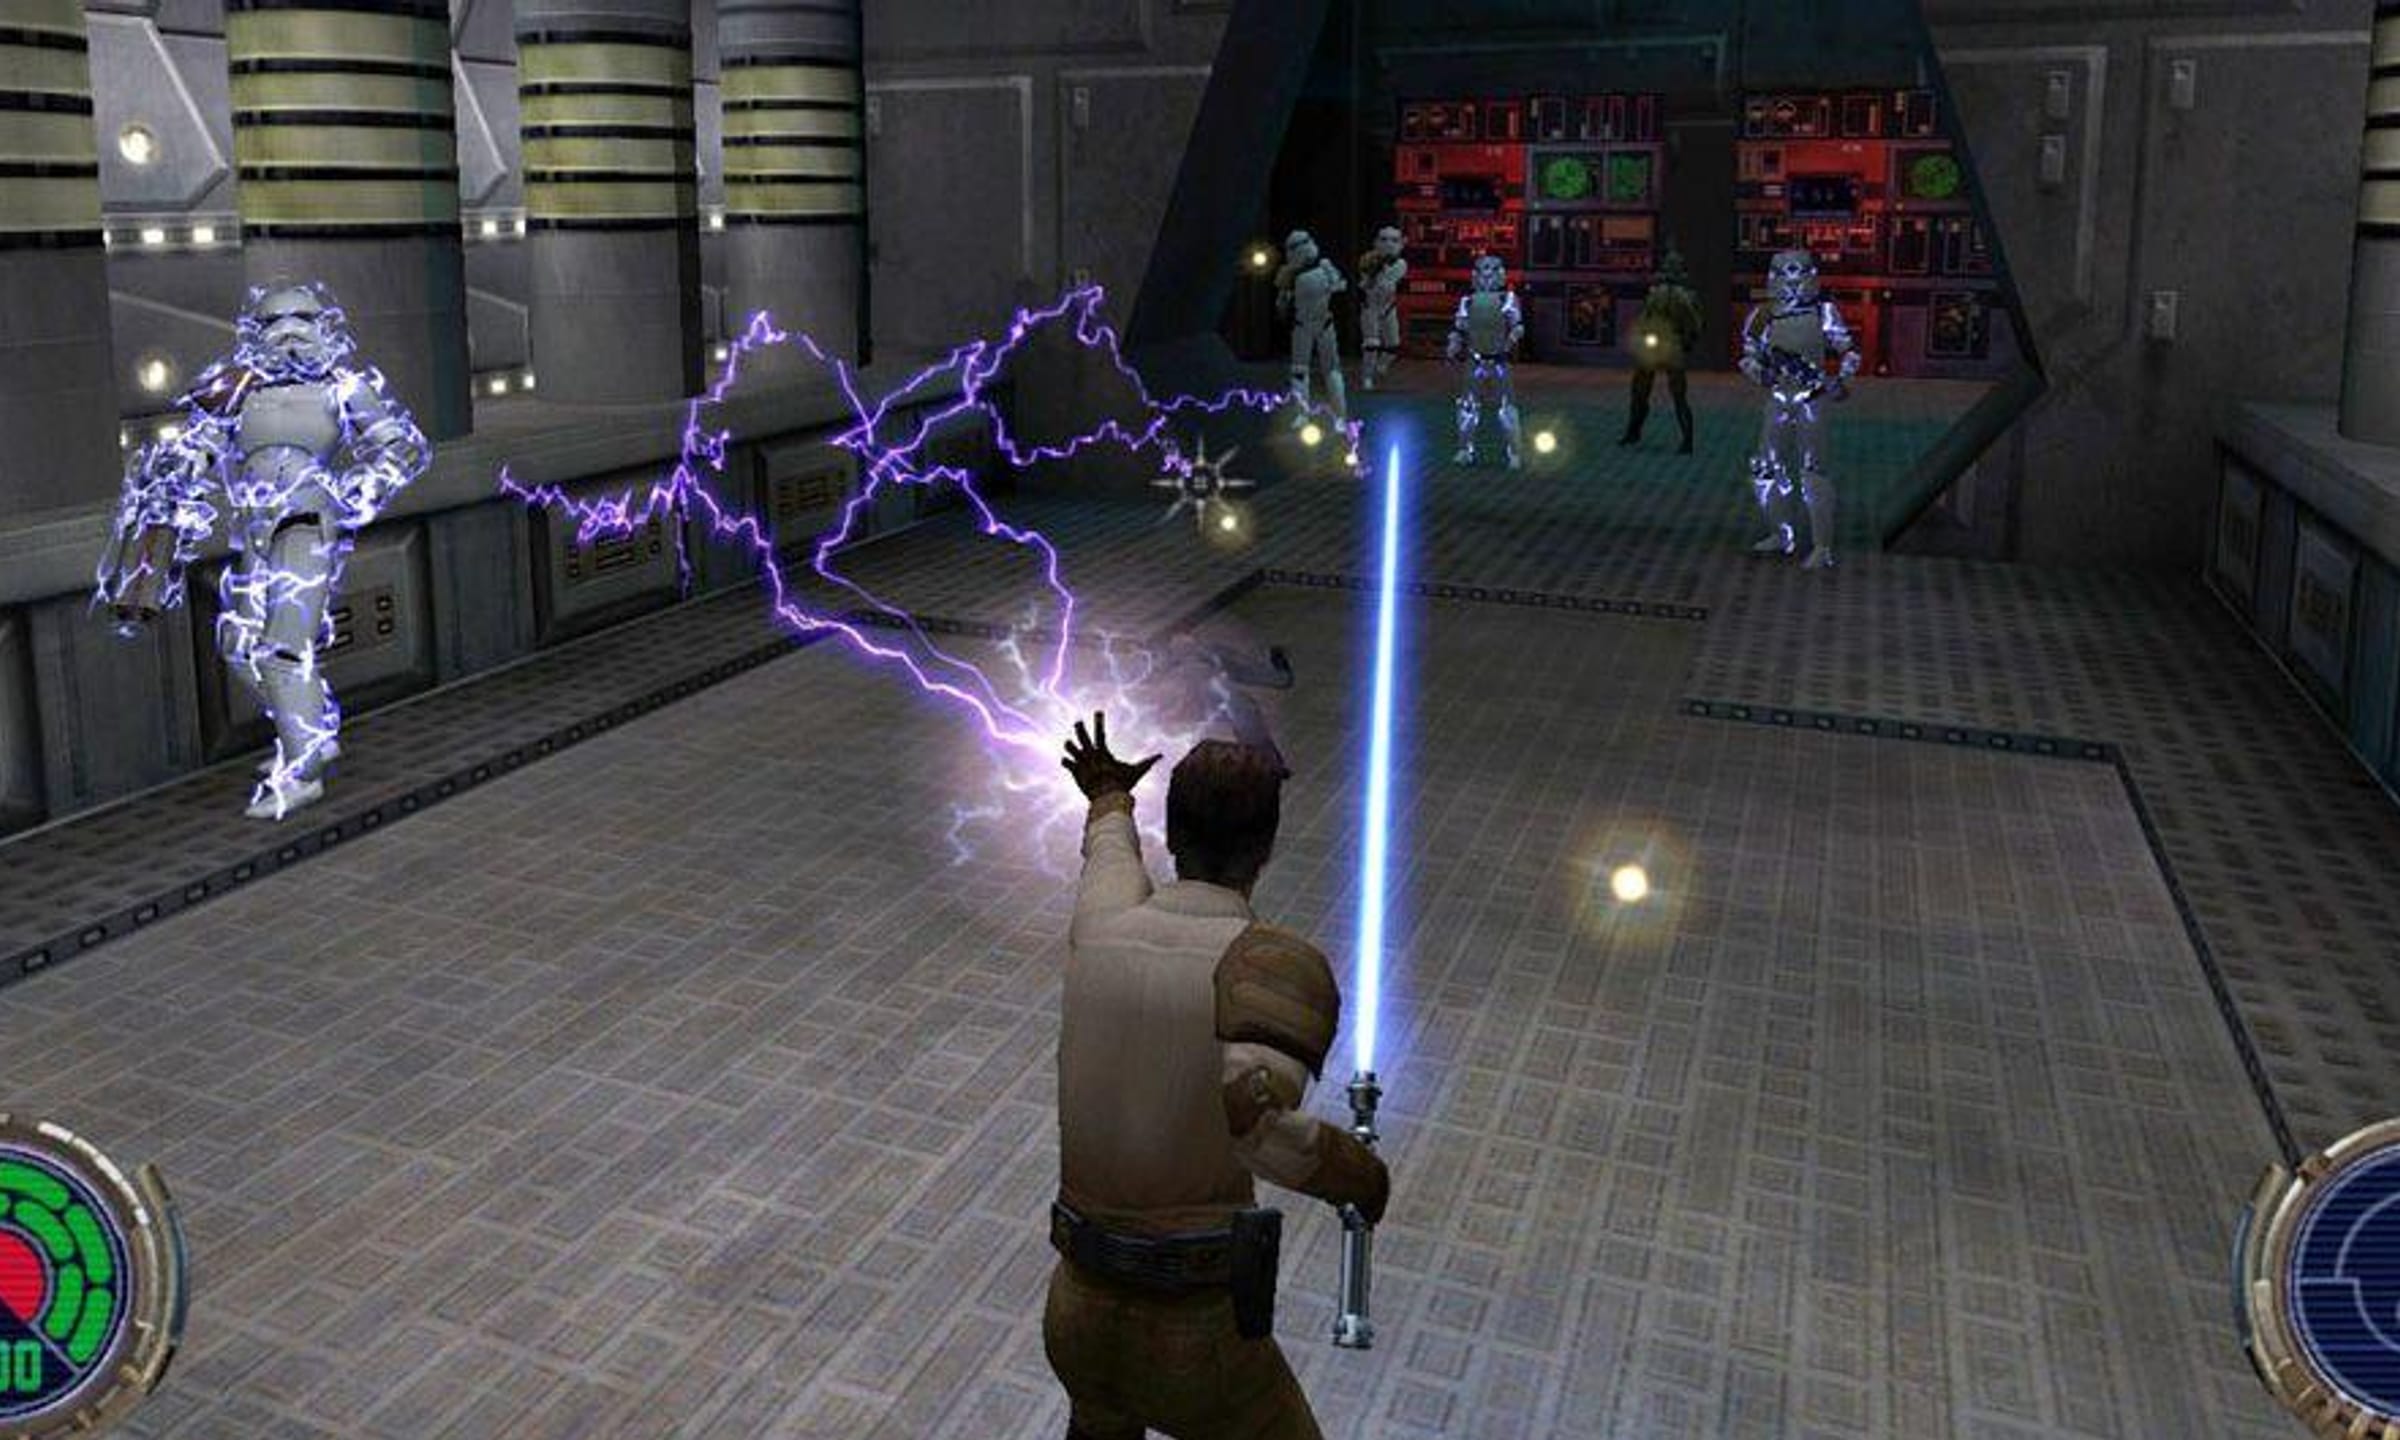 The 10 Best Star Wars Games on PC